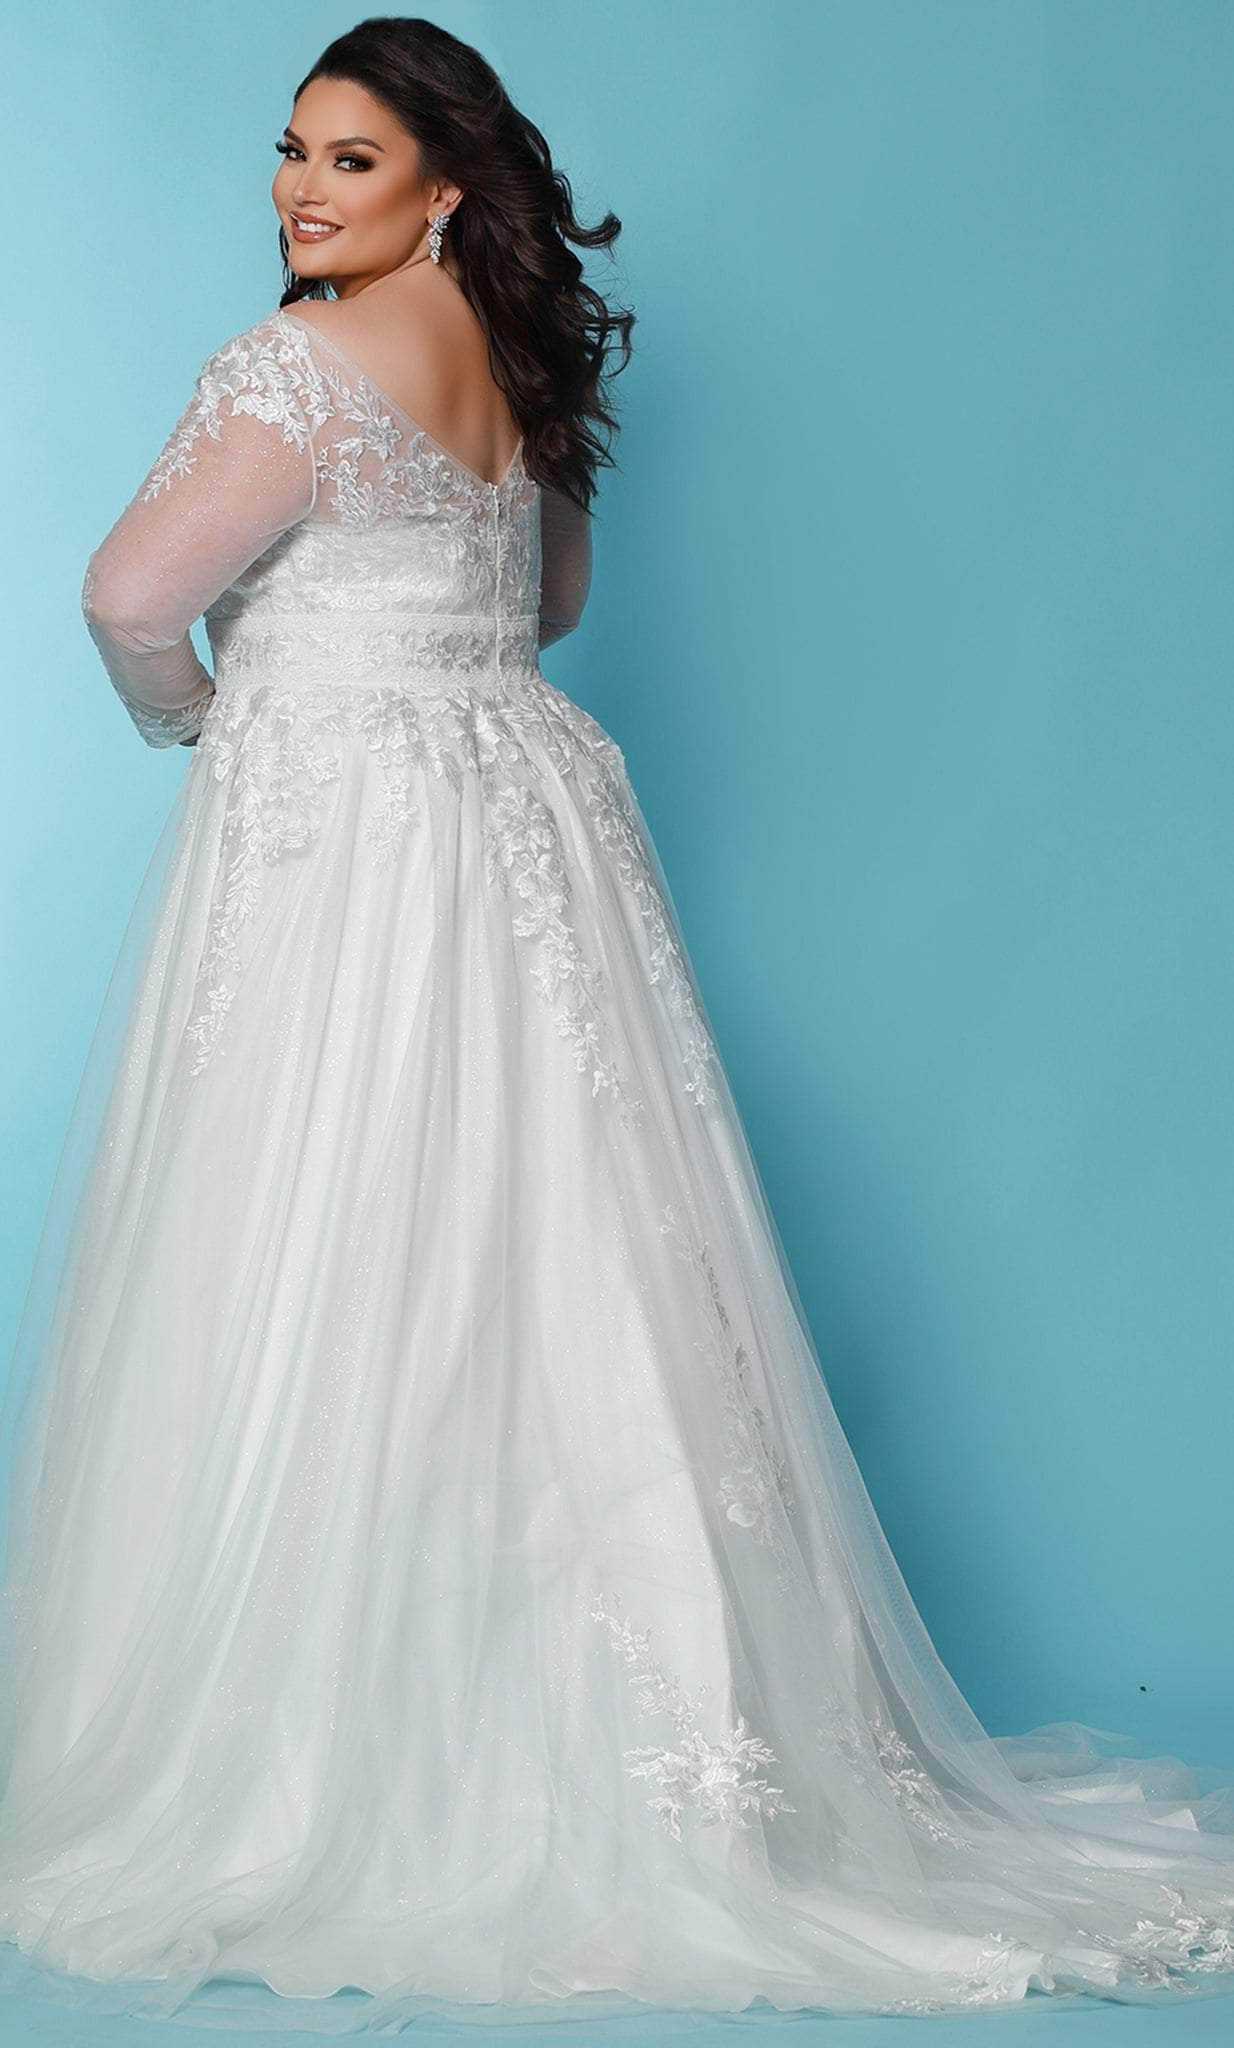 Sydney's Closet Bridal, Sydney's Closet Bridal SC5282 - Glittered A-line Bridal Gown